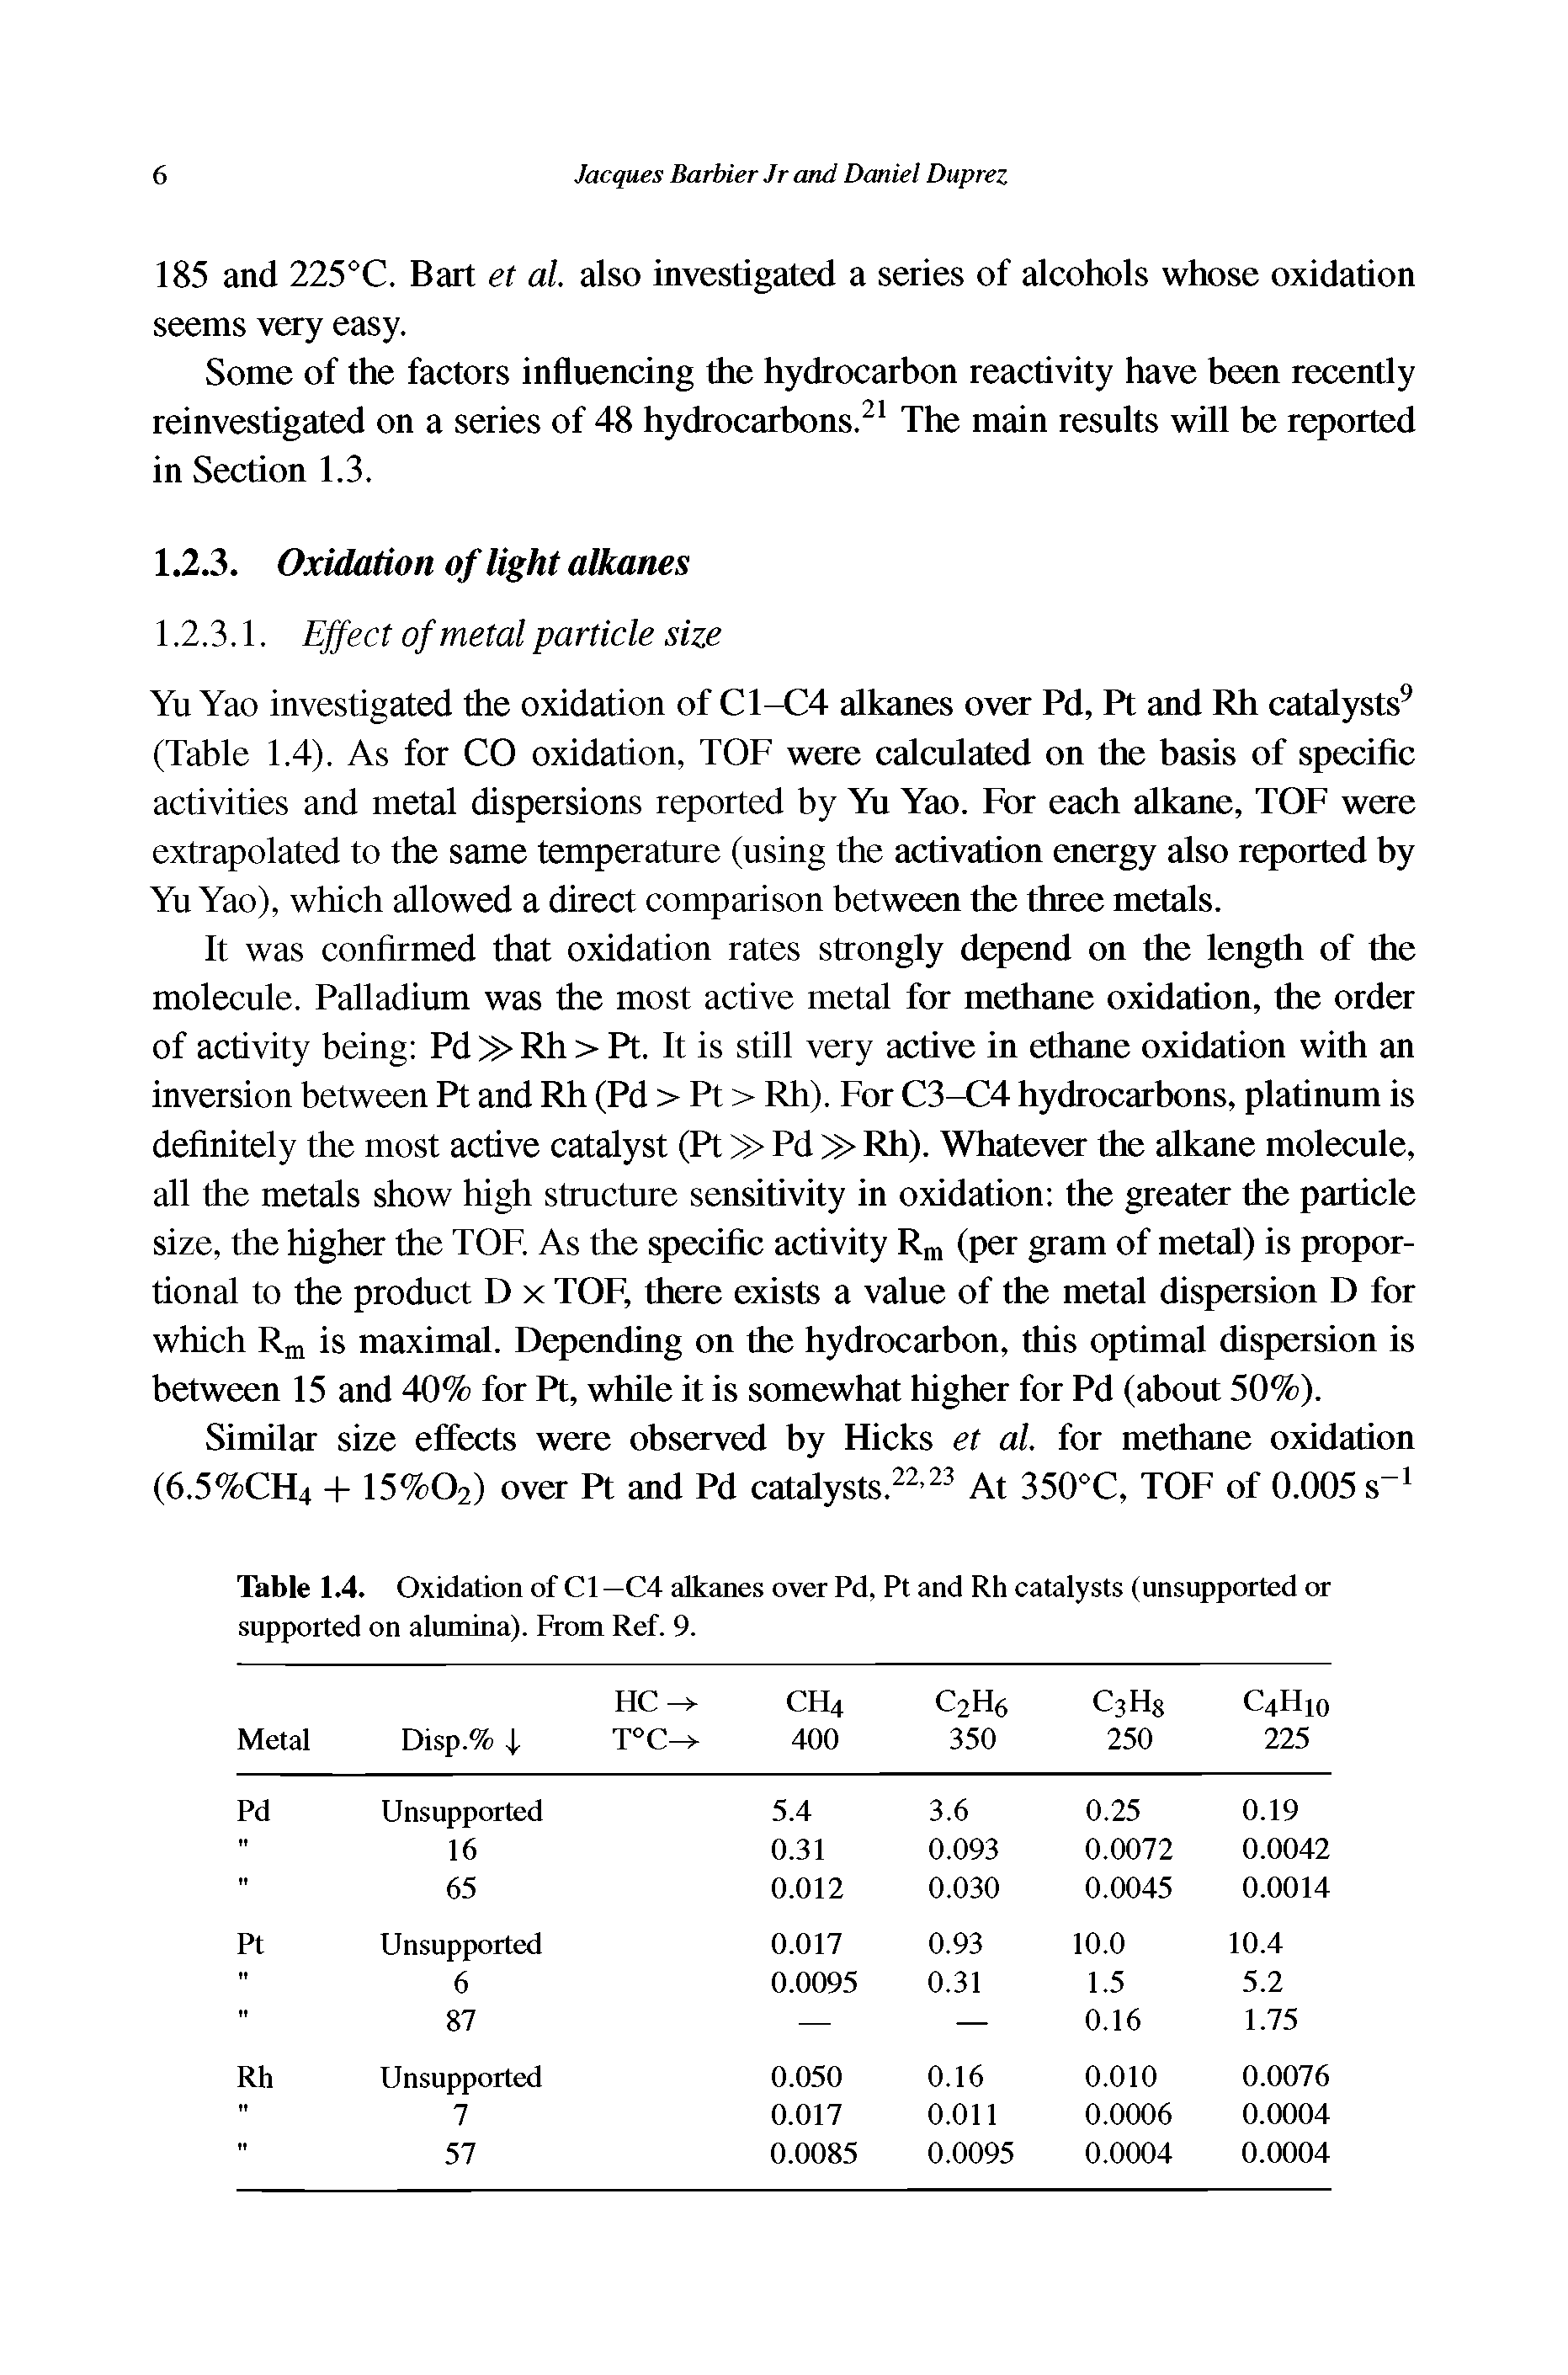 Table 1.4. Oxidation of Cl—C4 alkanes over Pd, Pt and Rh catalysts (unsupported or supported on alumina). From Ref. 9.